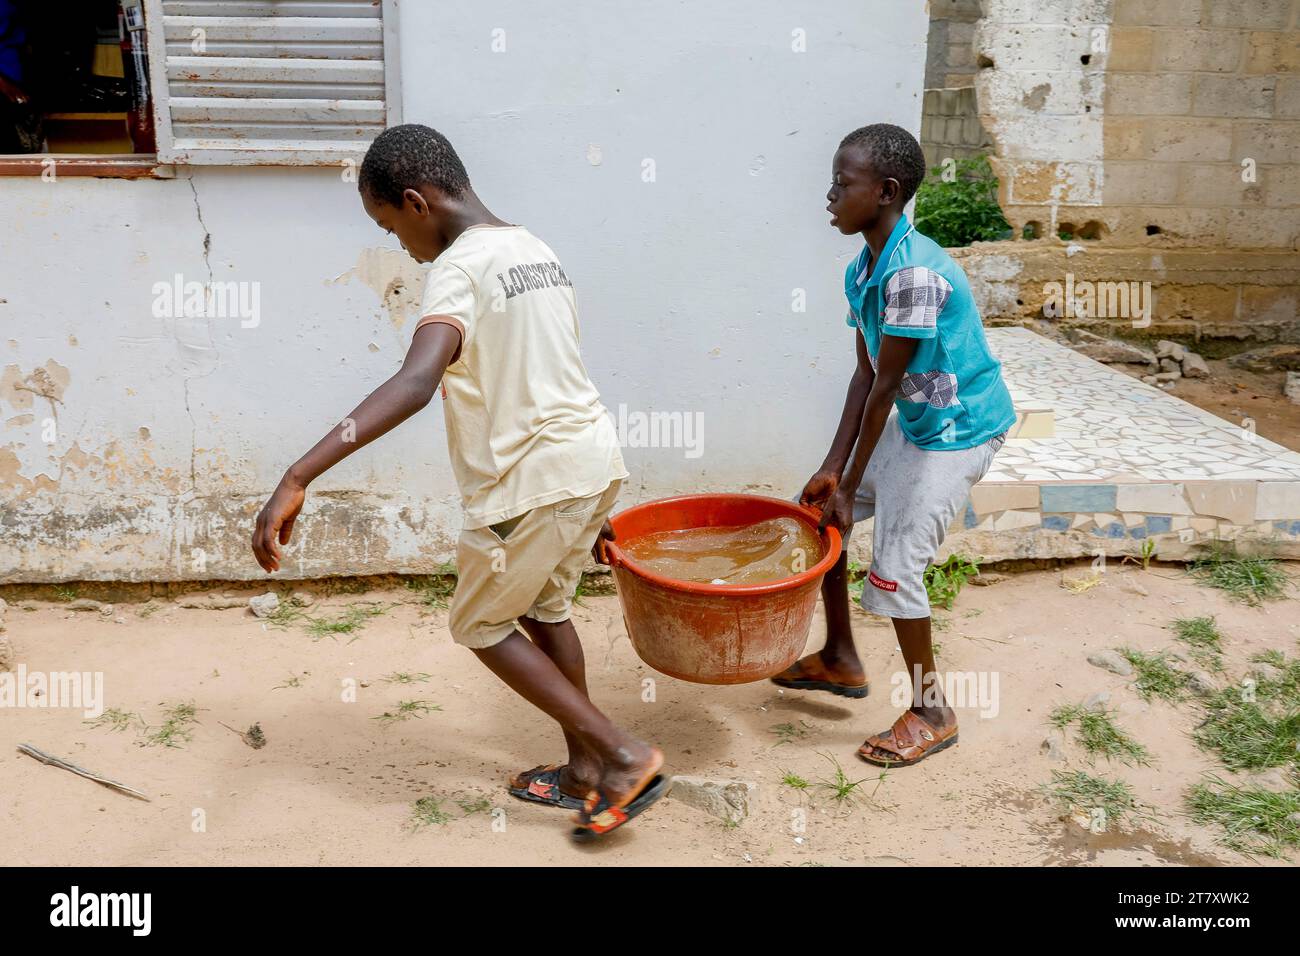 Boys fetching water in Thiaoune, Senegal, West Africa, Africa Stock Photo